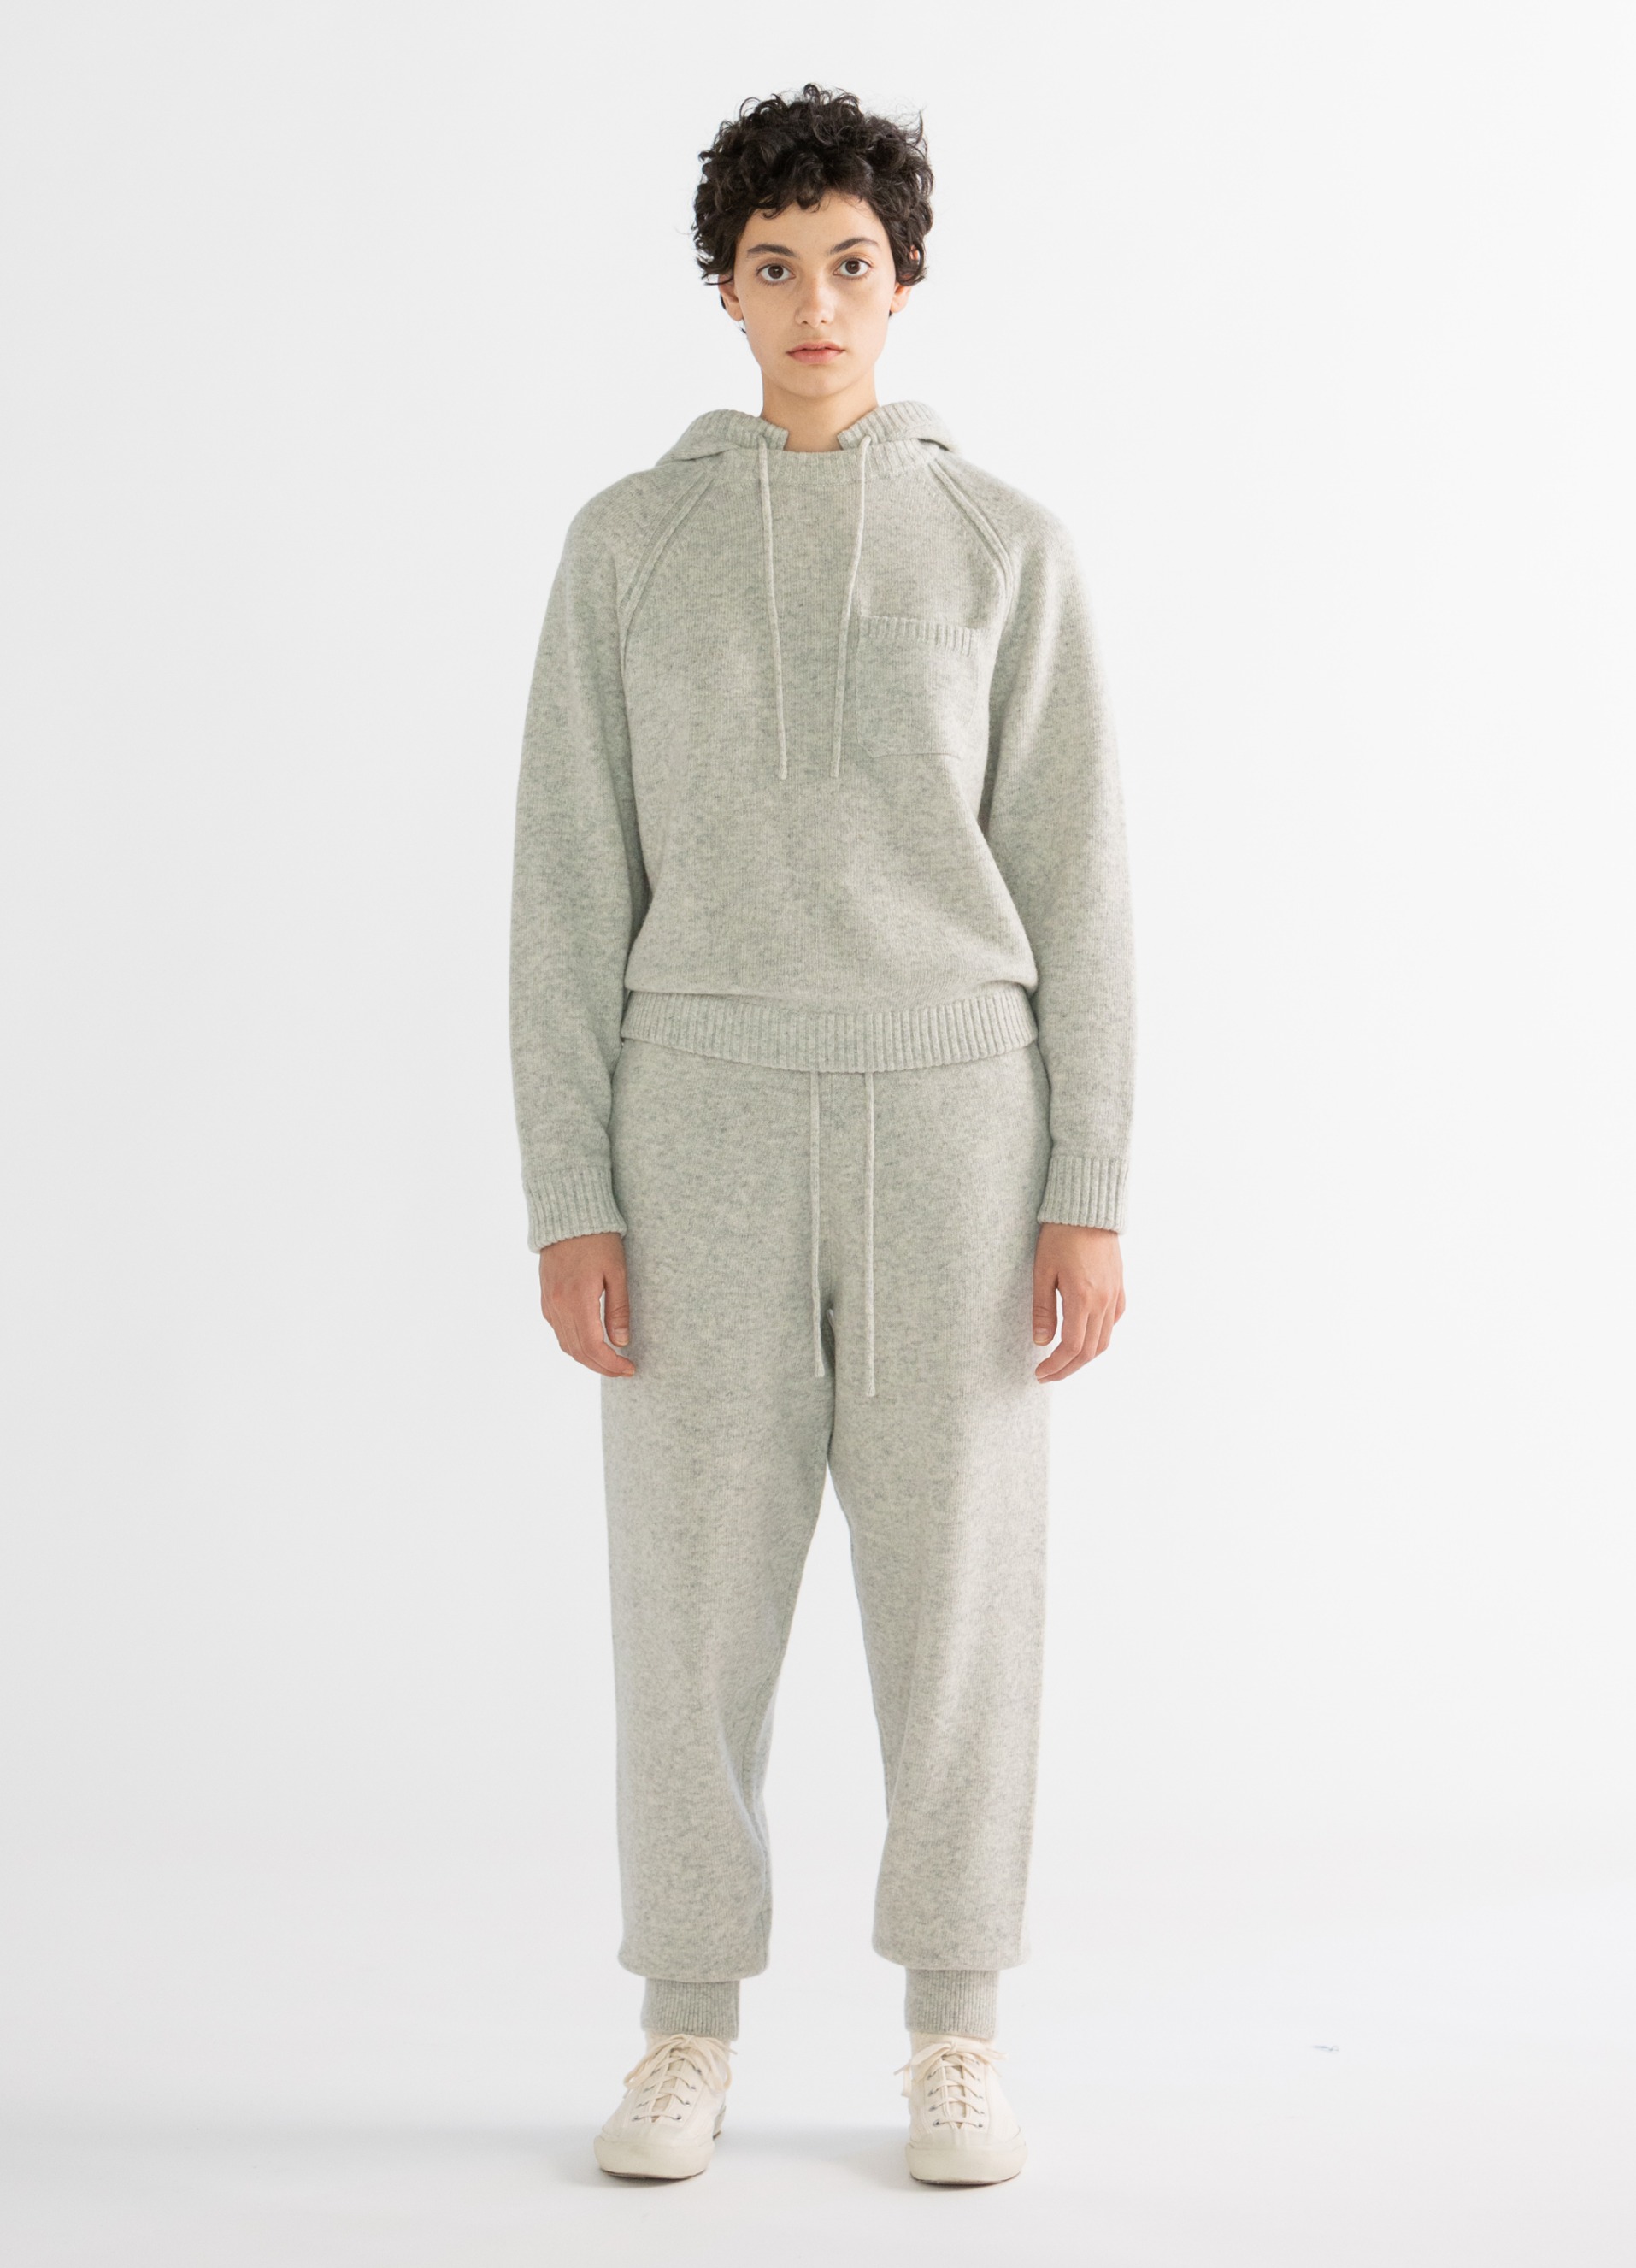 Rubio Knit Pants (Gary) Out Of Stock